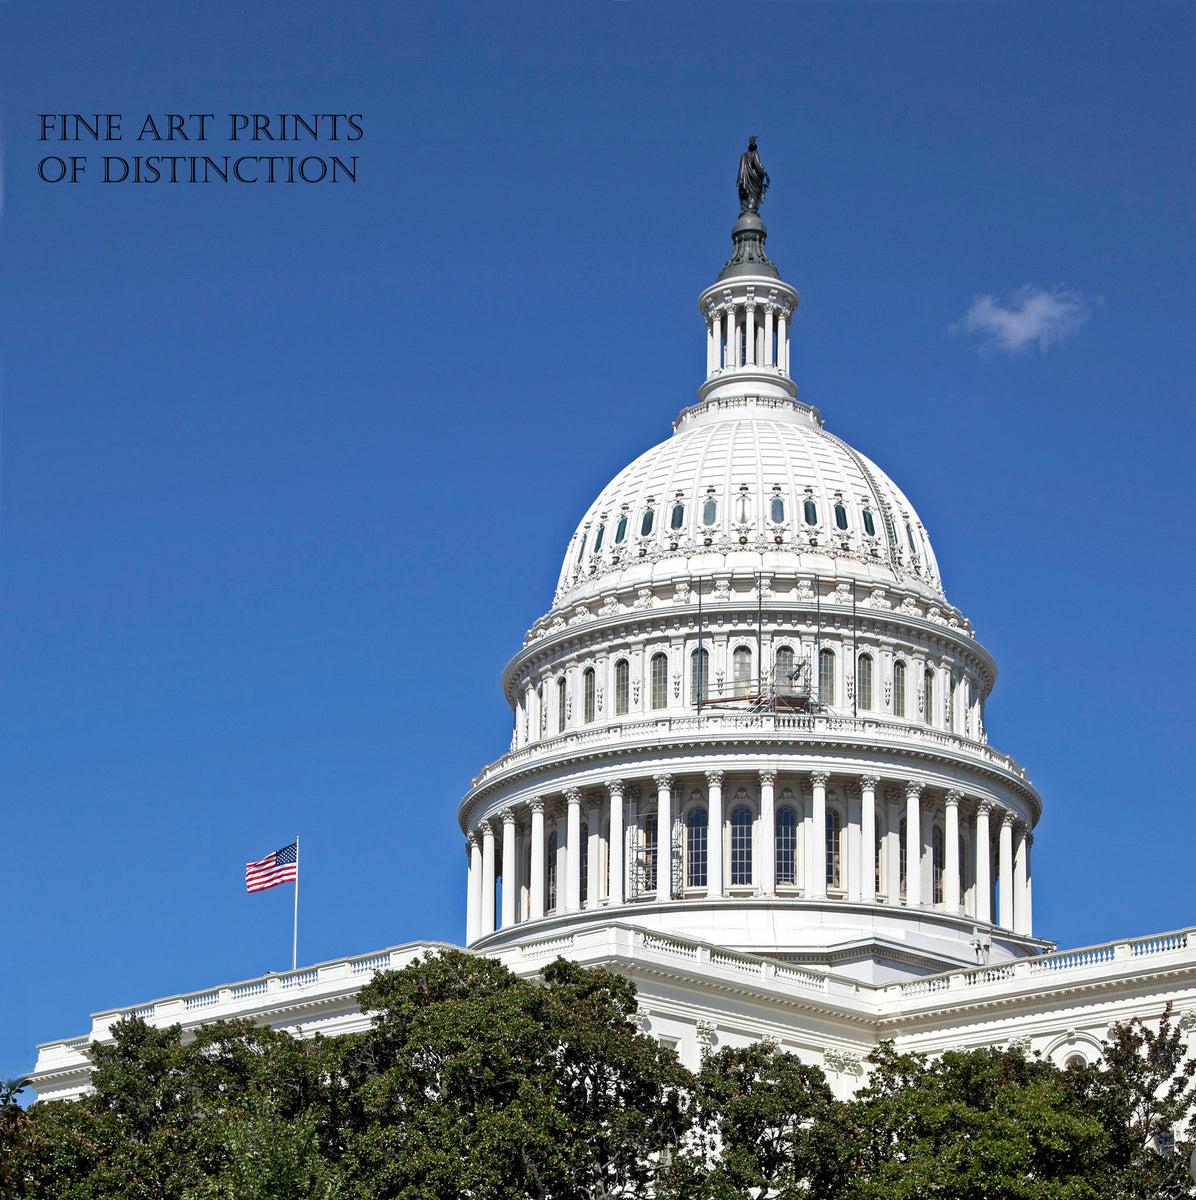 Dome of the United States Capitol Building Art Print